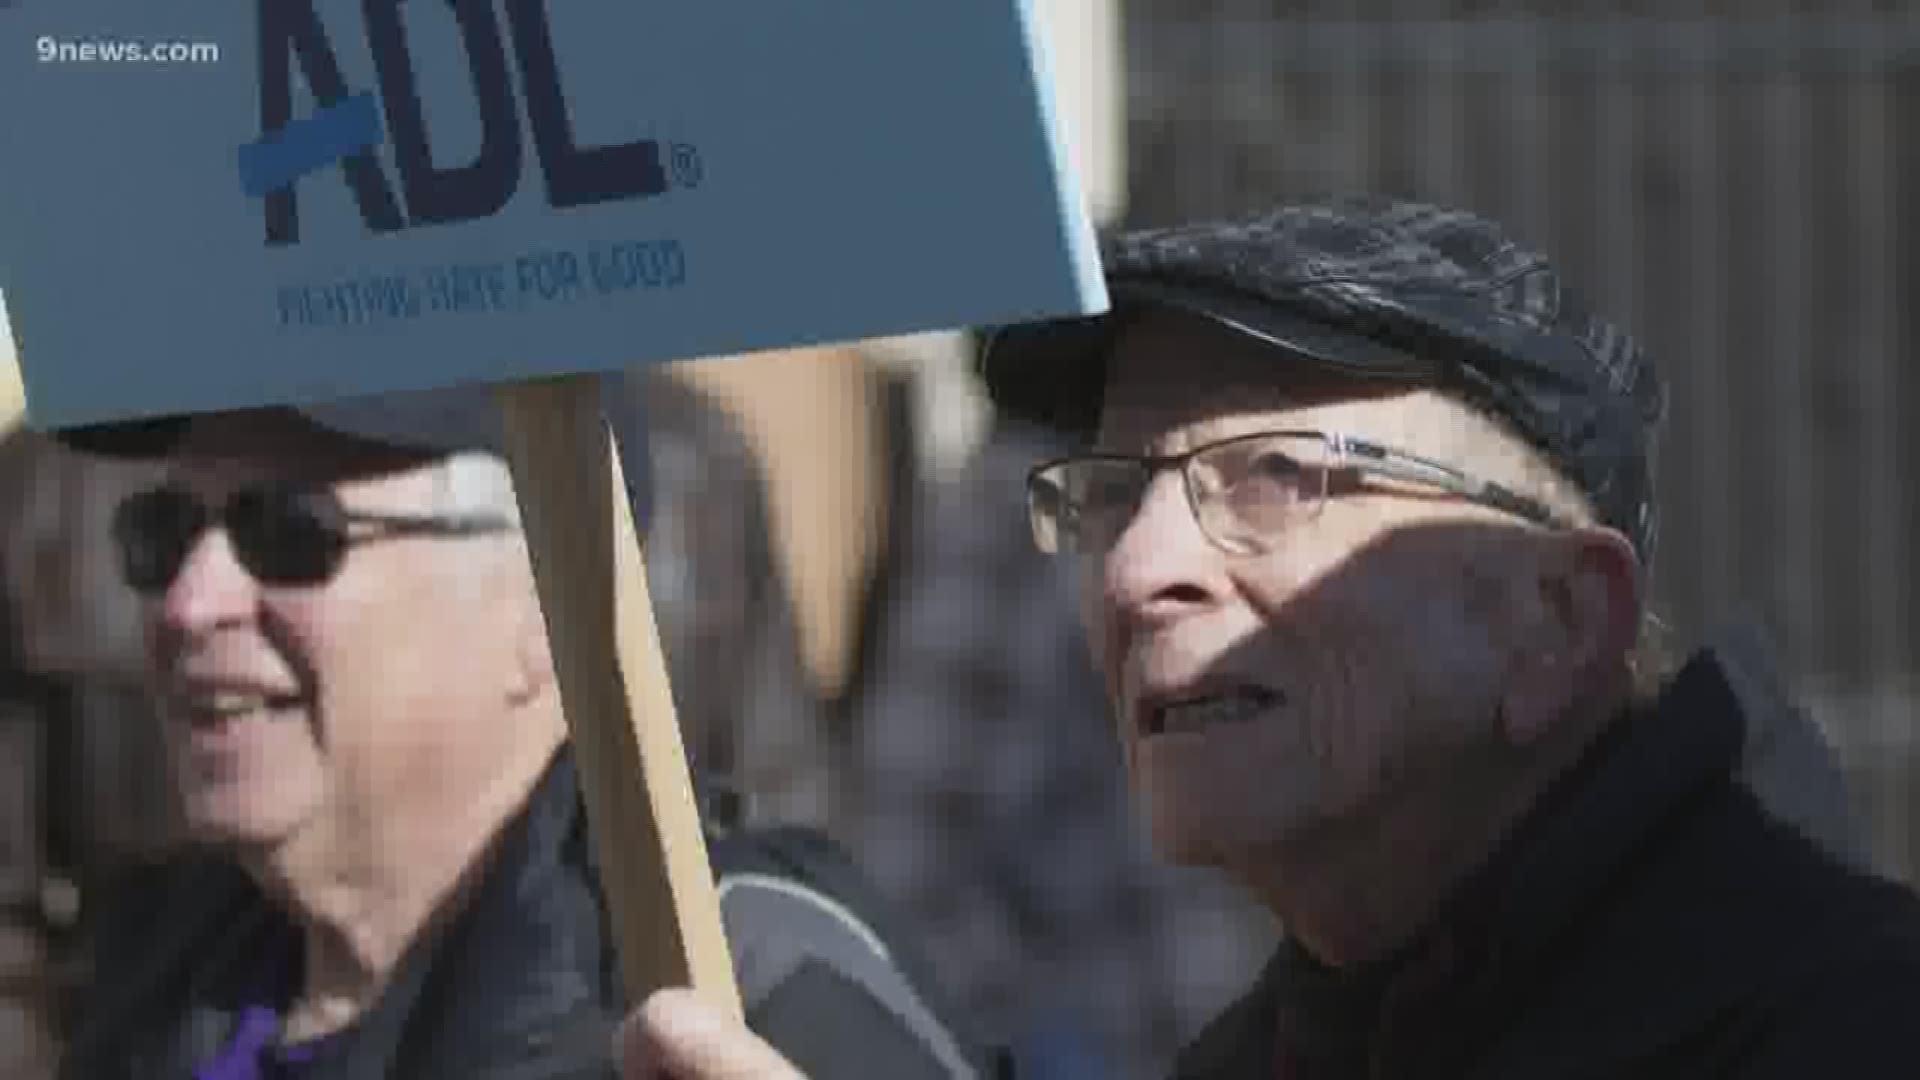 Sheldon Steinhauser is a retired MSU professor known for his work in civil rights. He shares his experience marching alongside Martin Luther King Jr. in 1965.